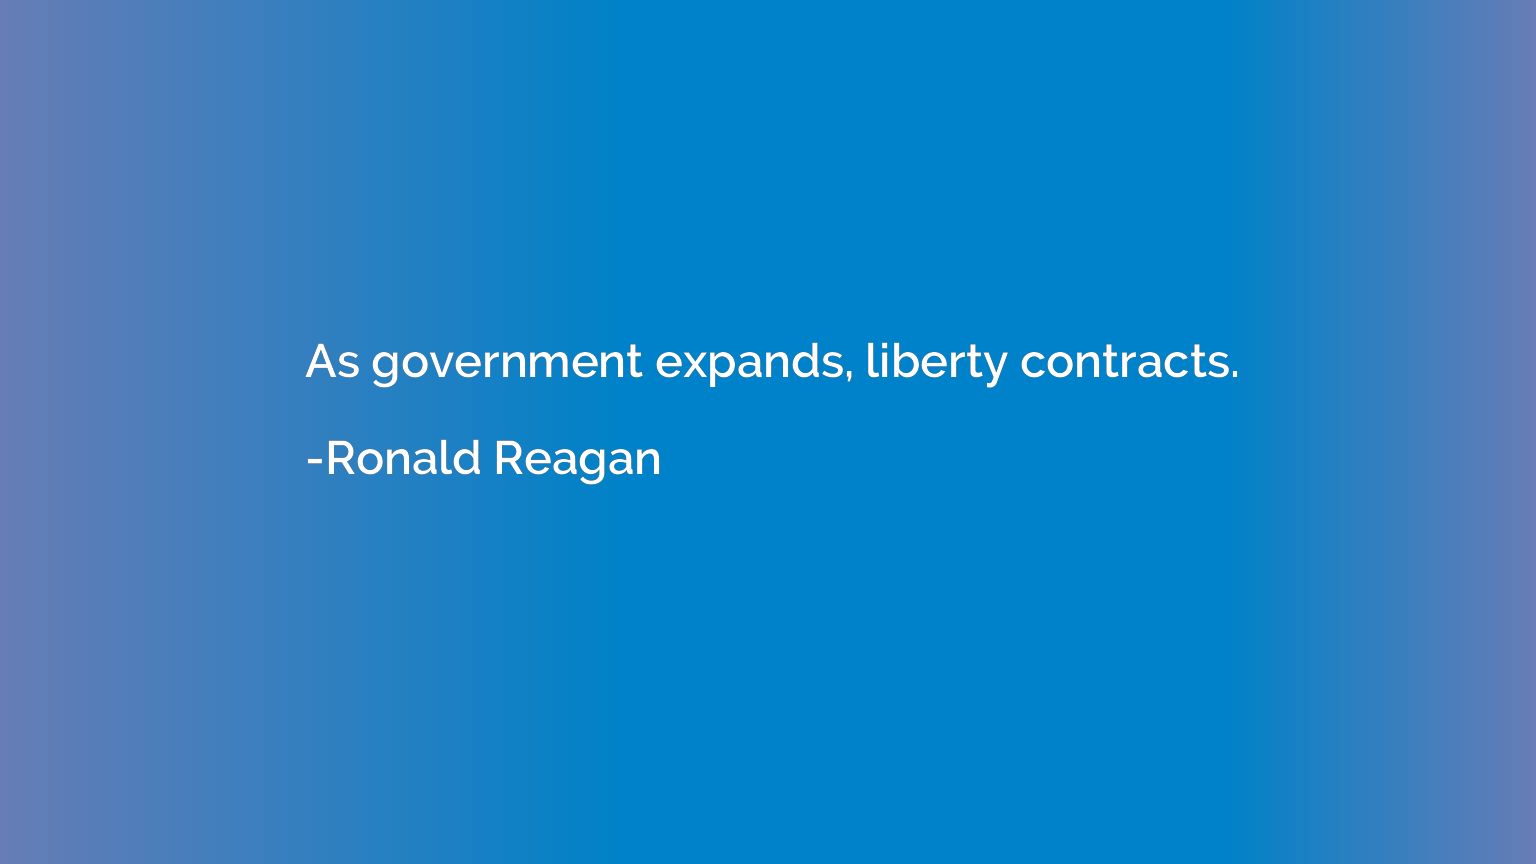 As government expands, liberty contracts.